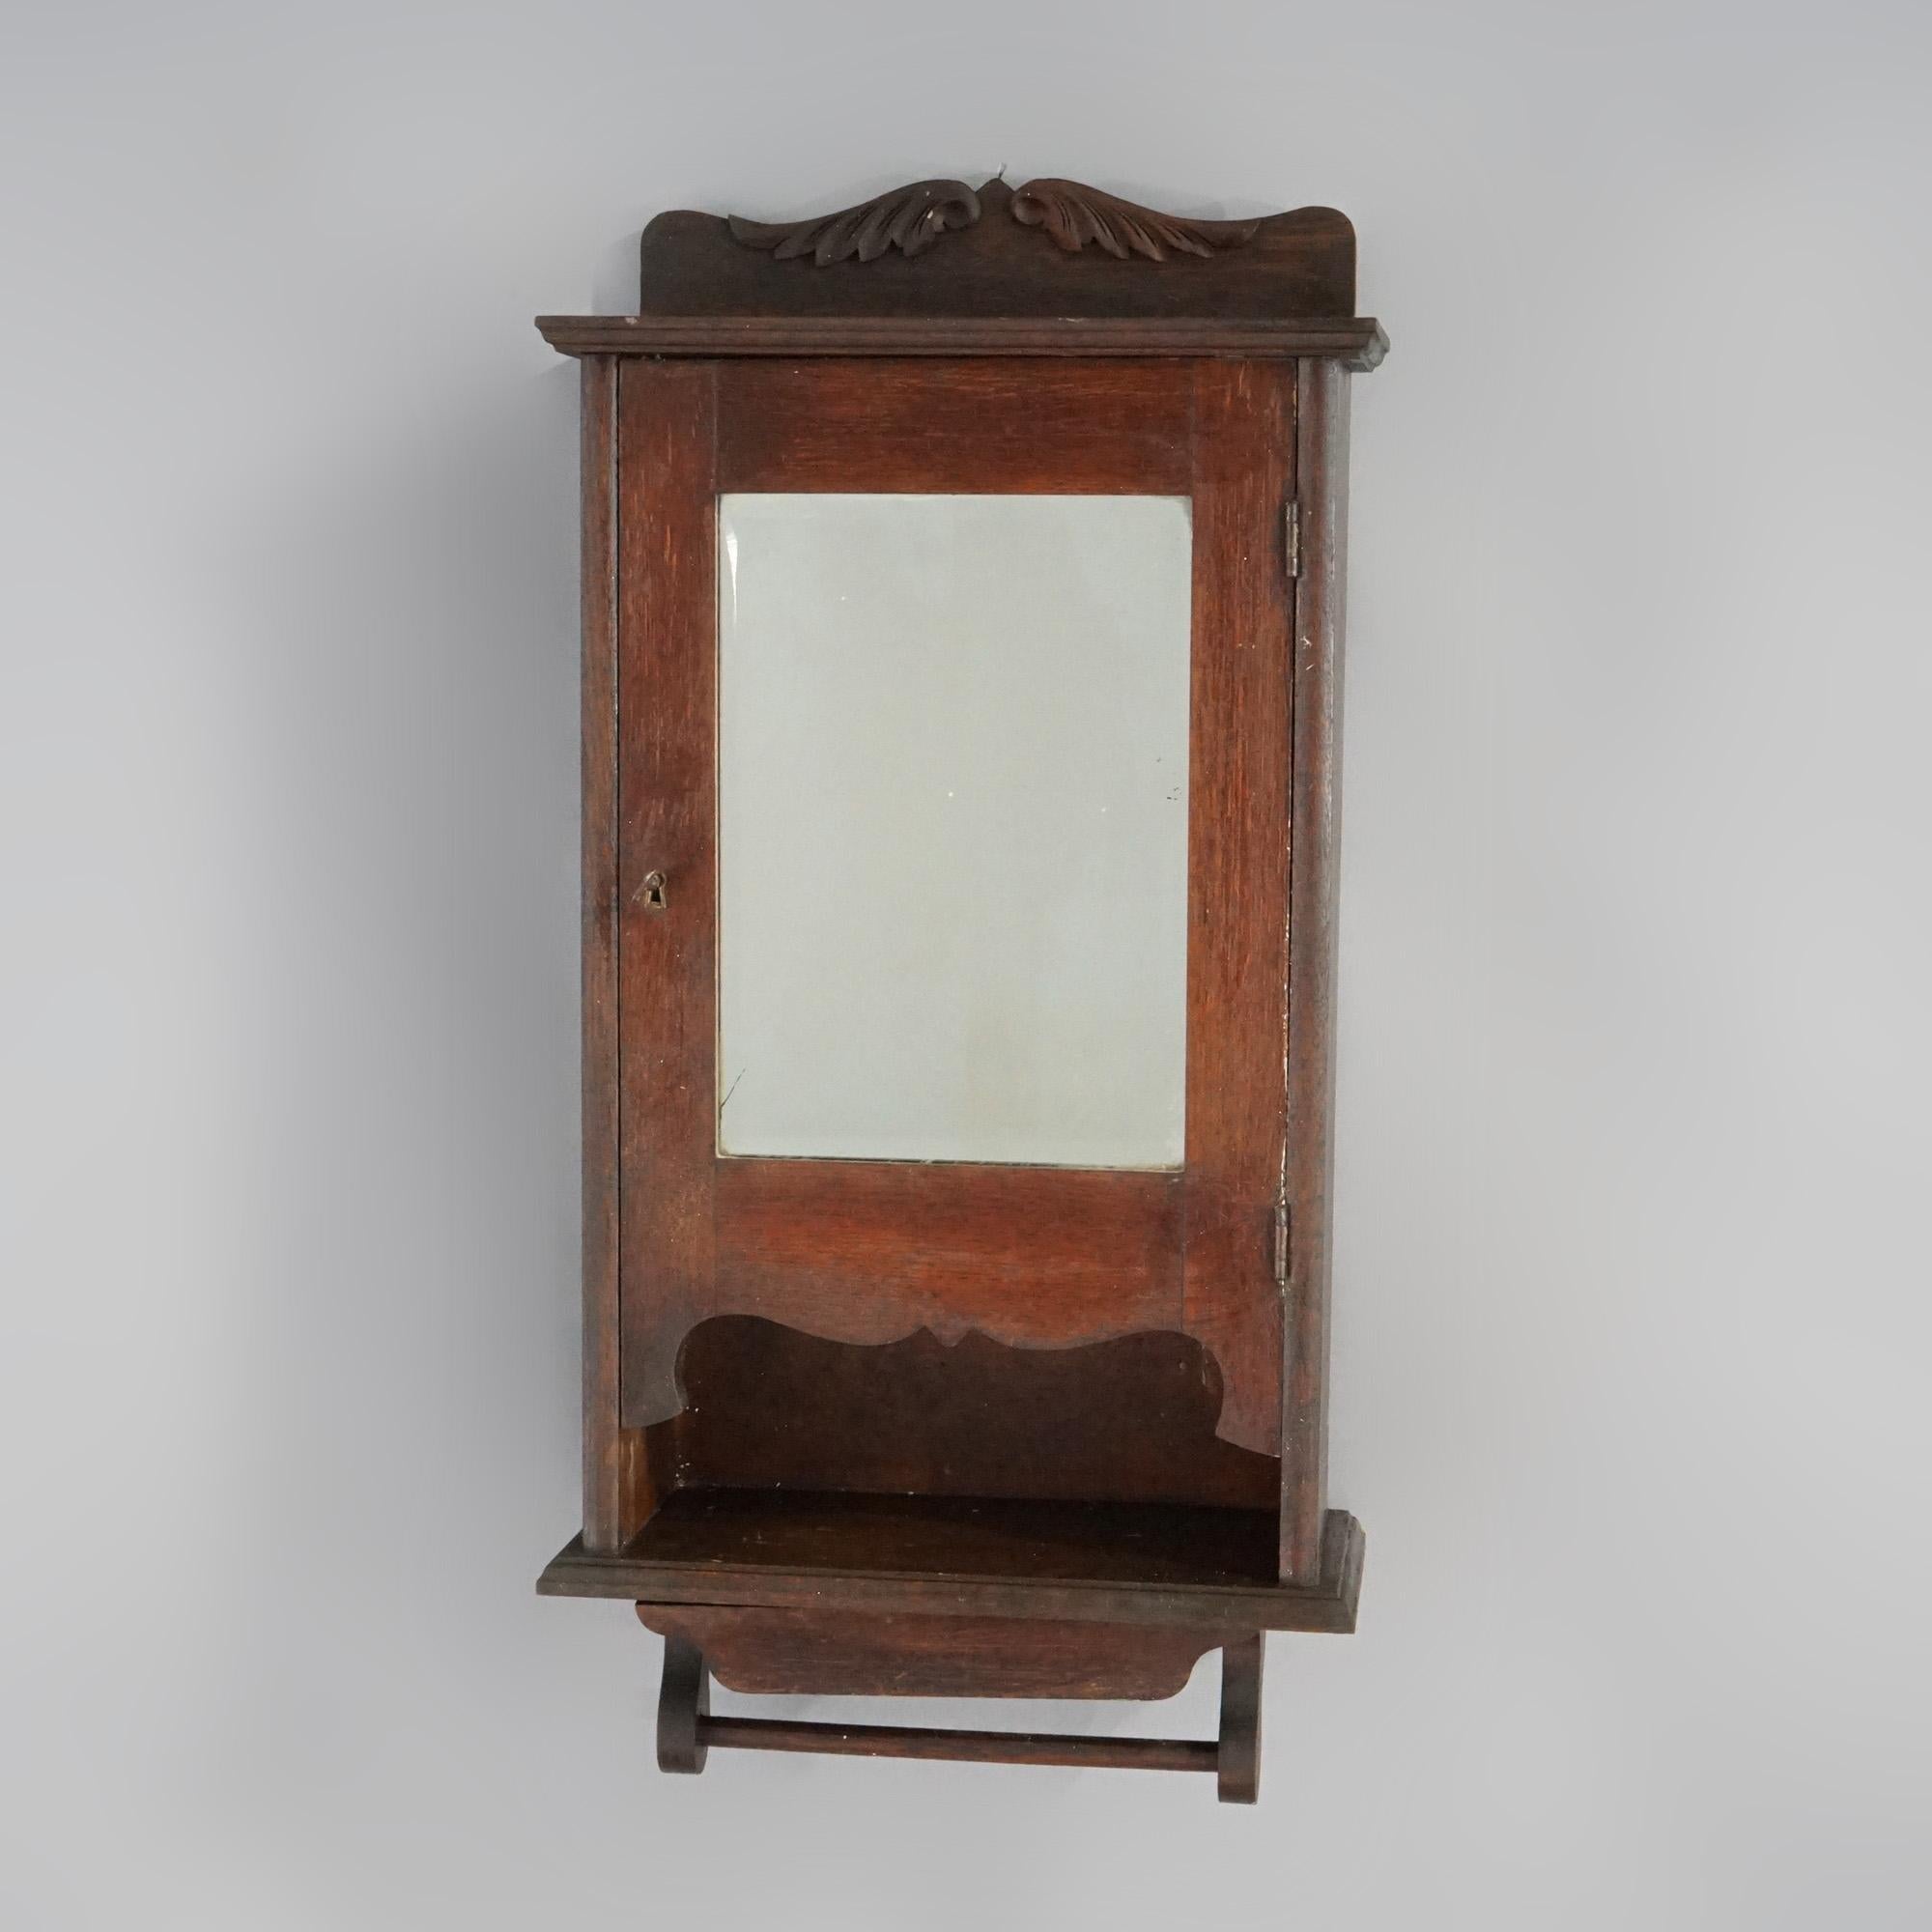 An antique Larkin medicine wall cabinet offers oak construction with shaped backsplash having carved foliate elements over case with single mirrored door opening to compartmentalized interior, over towel bar and small pull-out drawer, working lock